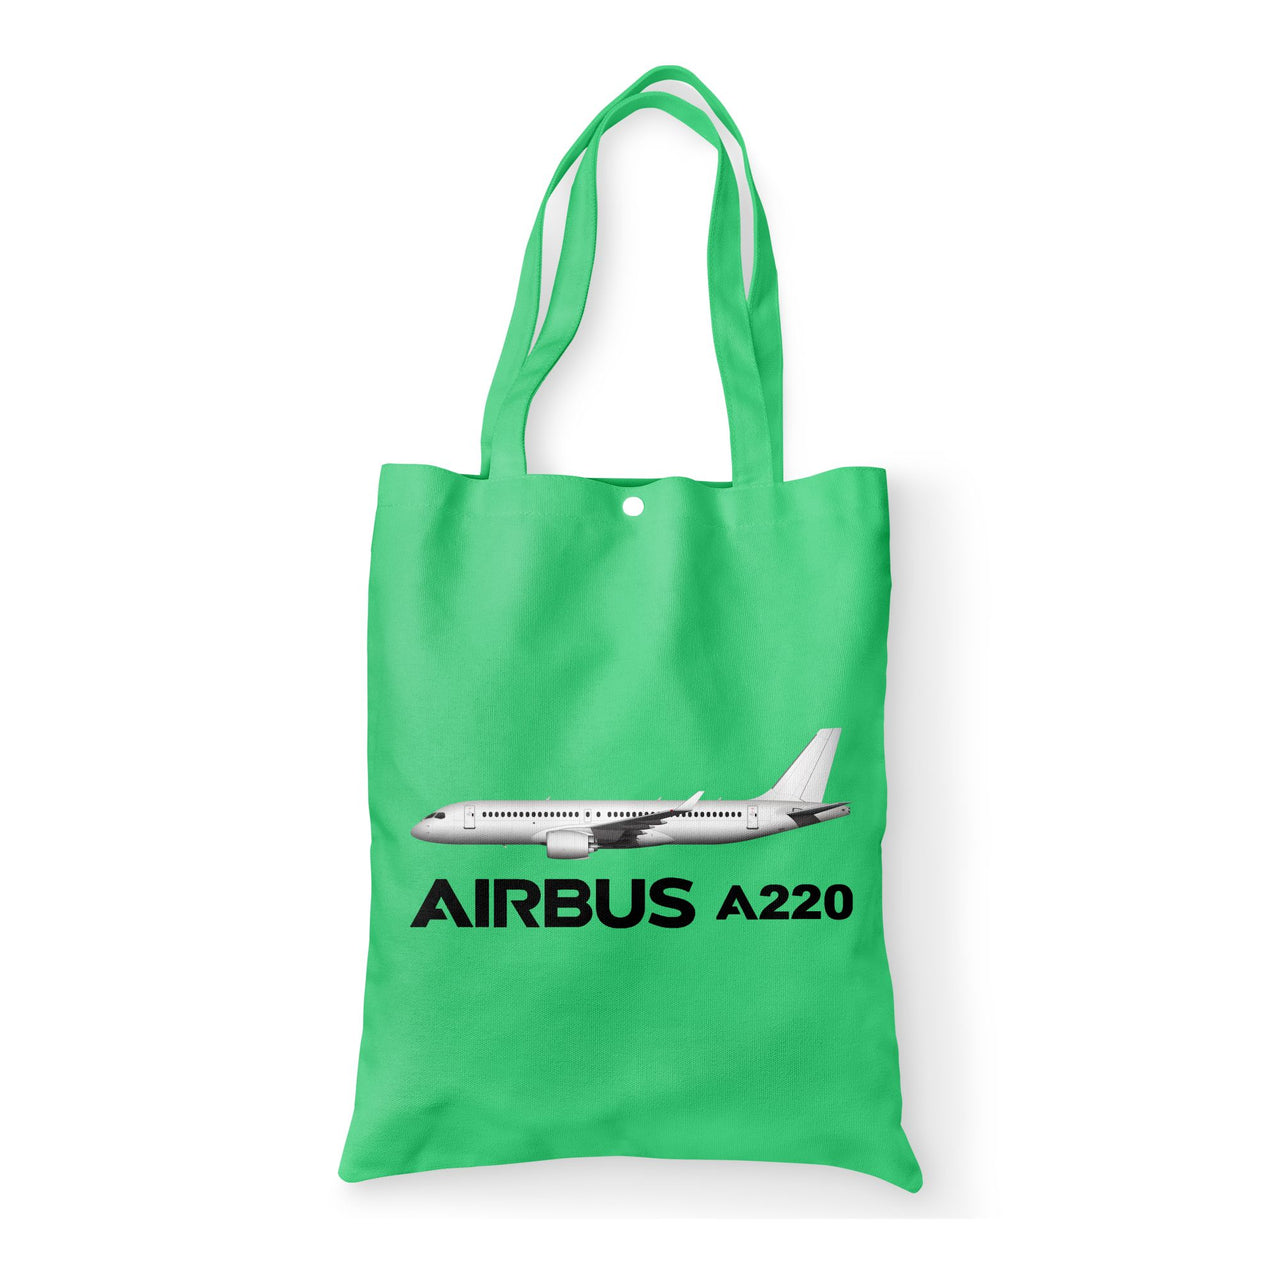 The Airbus A220 Designed Tote Bags